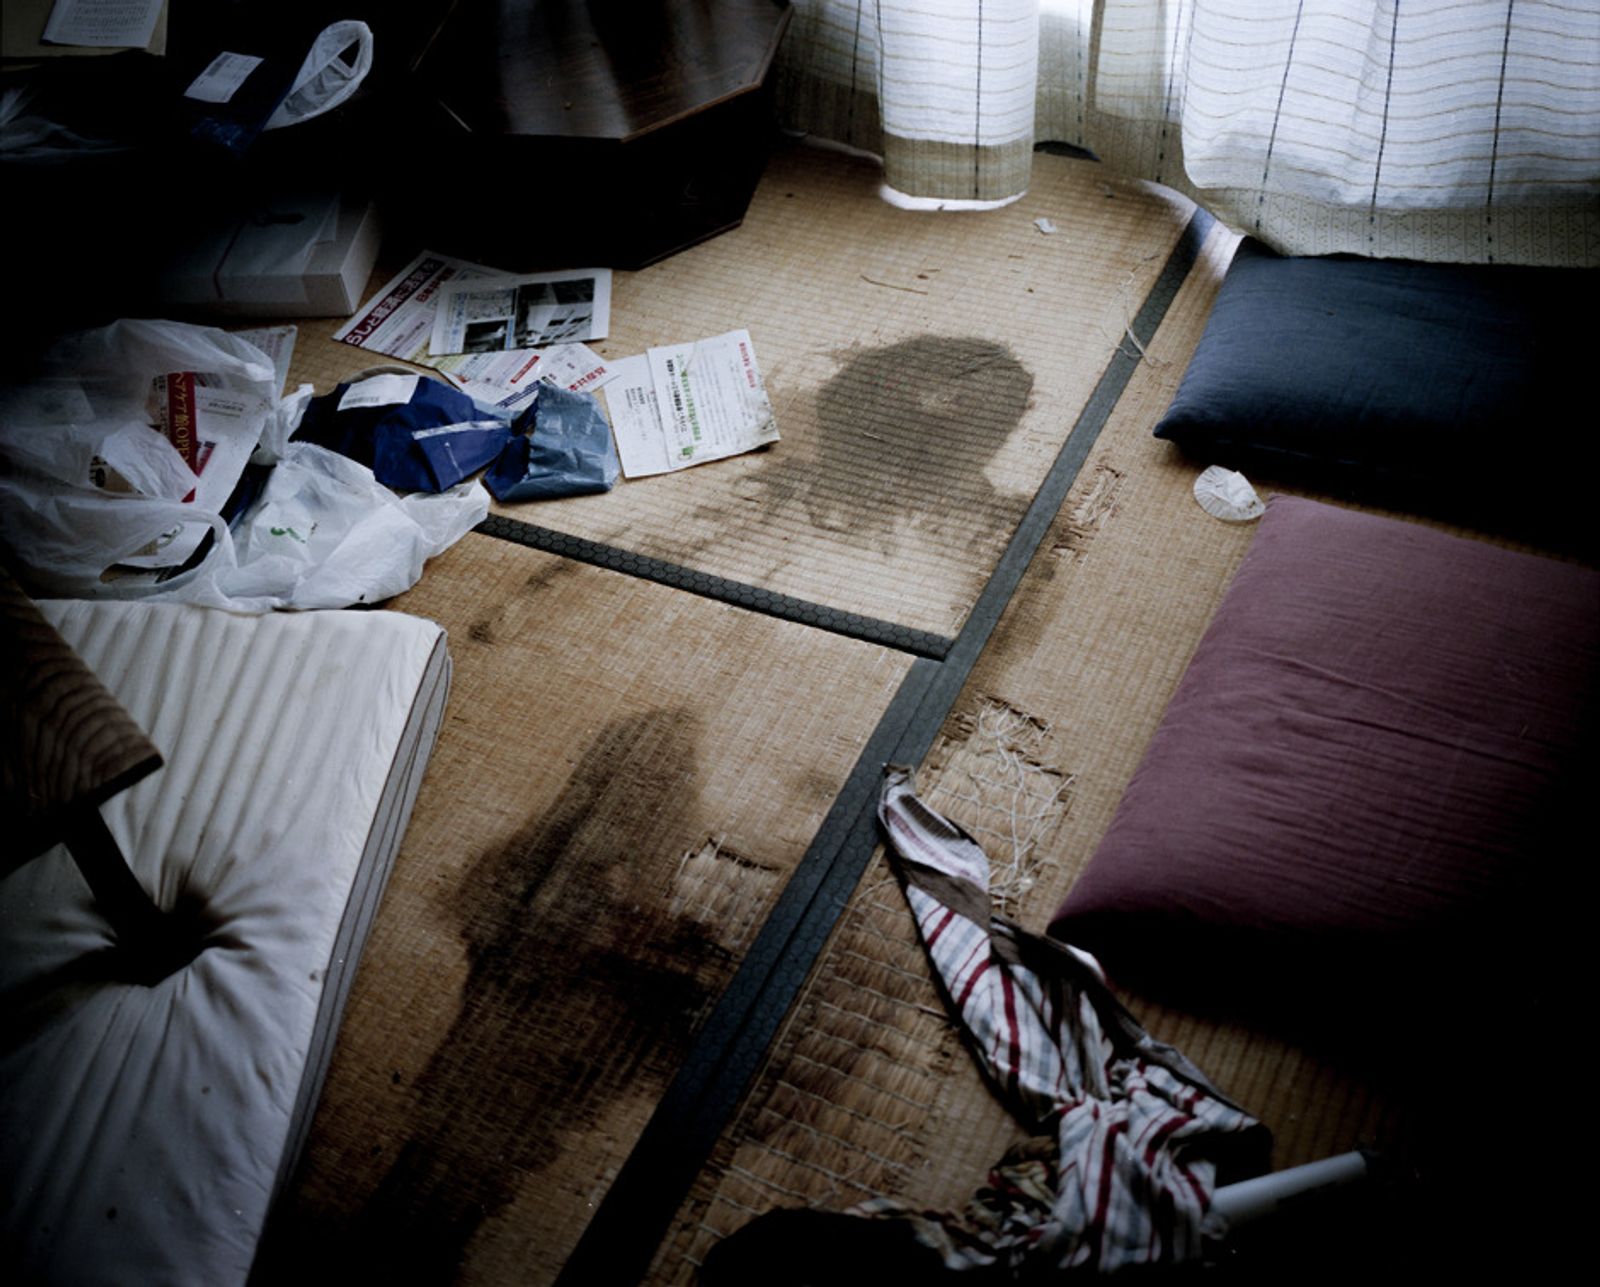 © Soichiro Koriyama - Image from the Apartments in Tokyo  photography project